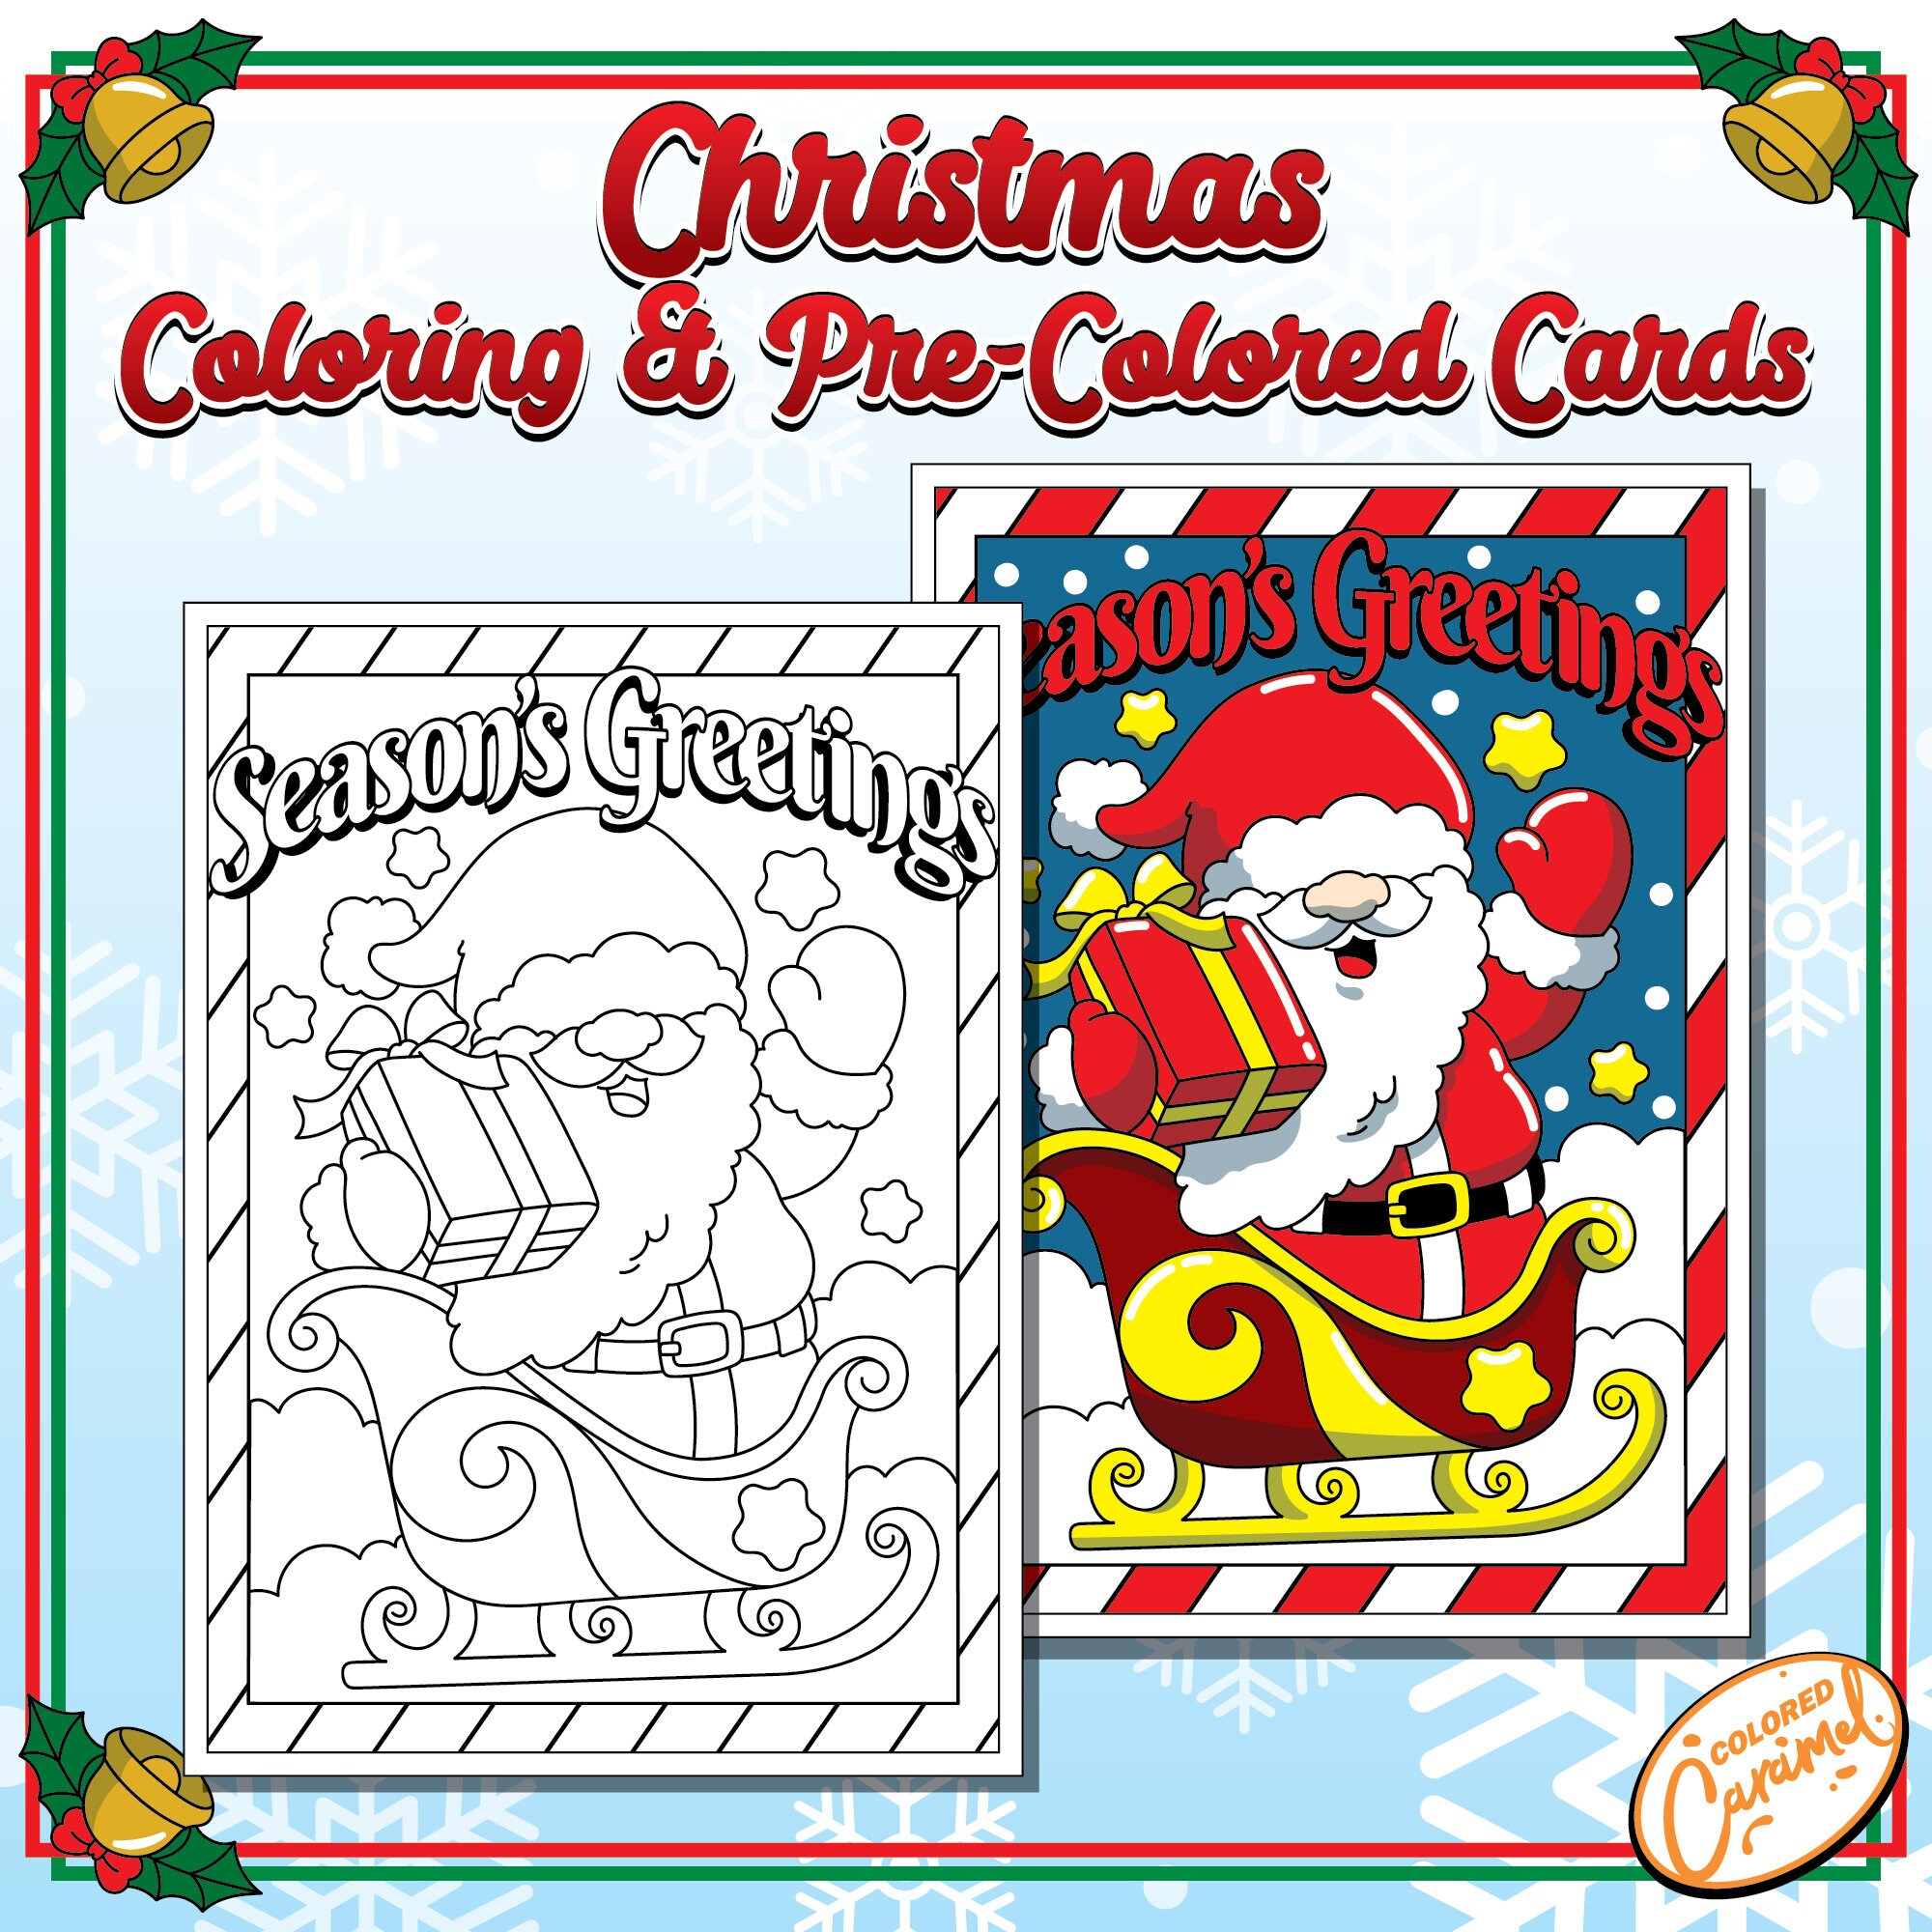 Christmas Gnomes Coloring Card, Colorable and Pre-colored Holiday Greeting Card, DIY Festive and Joyful Printable Instant Digital Download